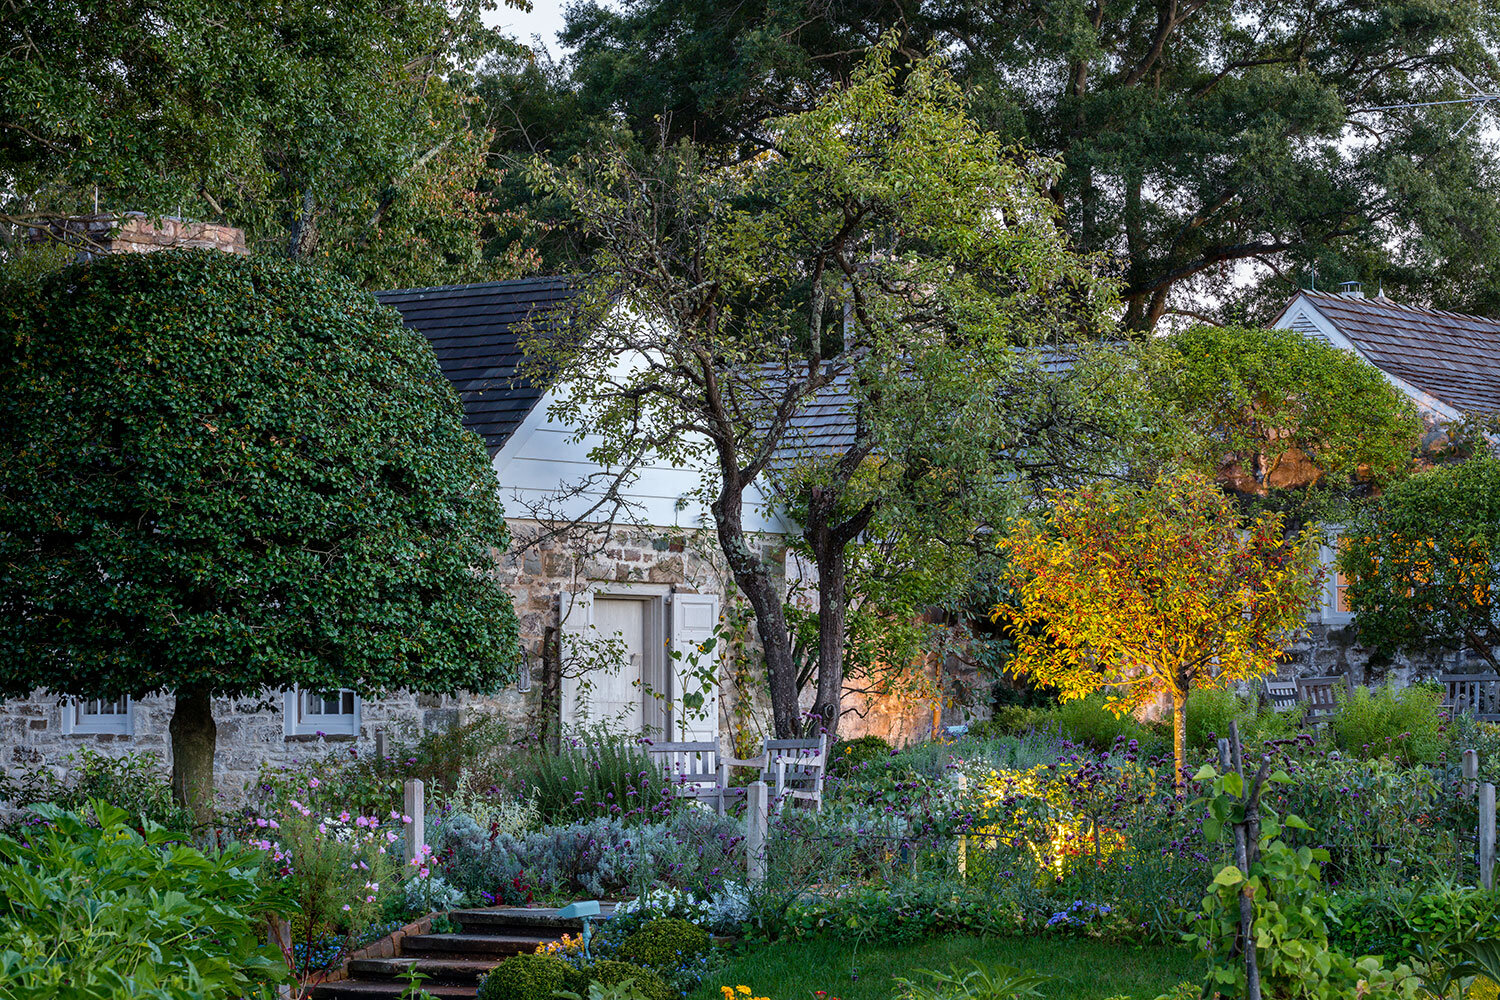  In 2015 and 2016 restoration work began in the garden. New plants, espaliers, and cordons replaced those that had been lost. Here is the garden in 2017, photographed by Roger Foley for  The Gardens of Bunny Mellon  with the support of the Oak Spring